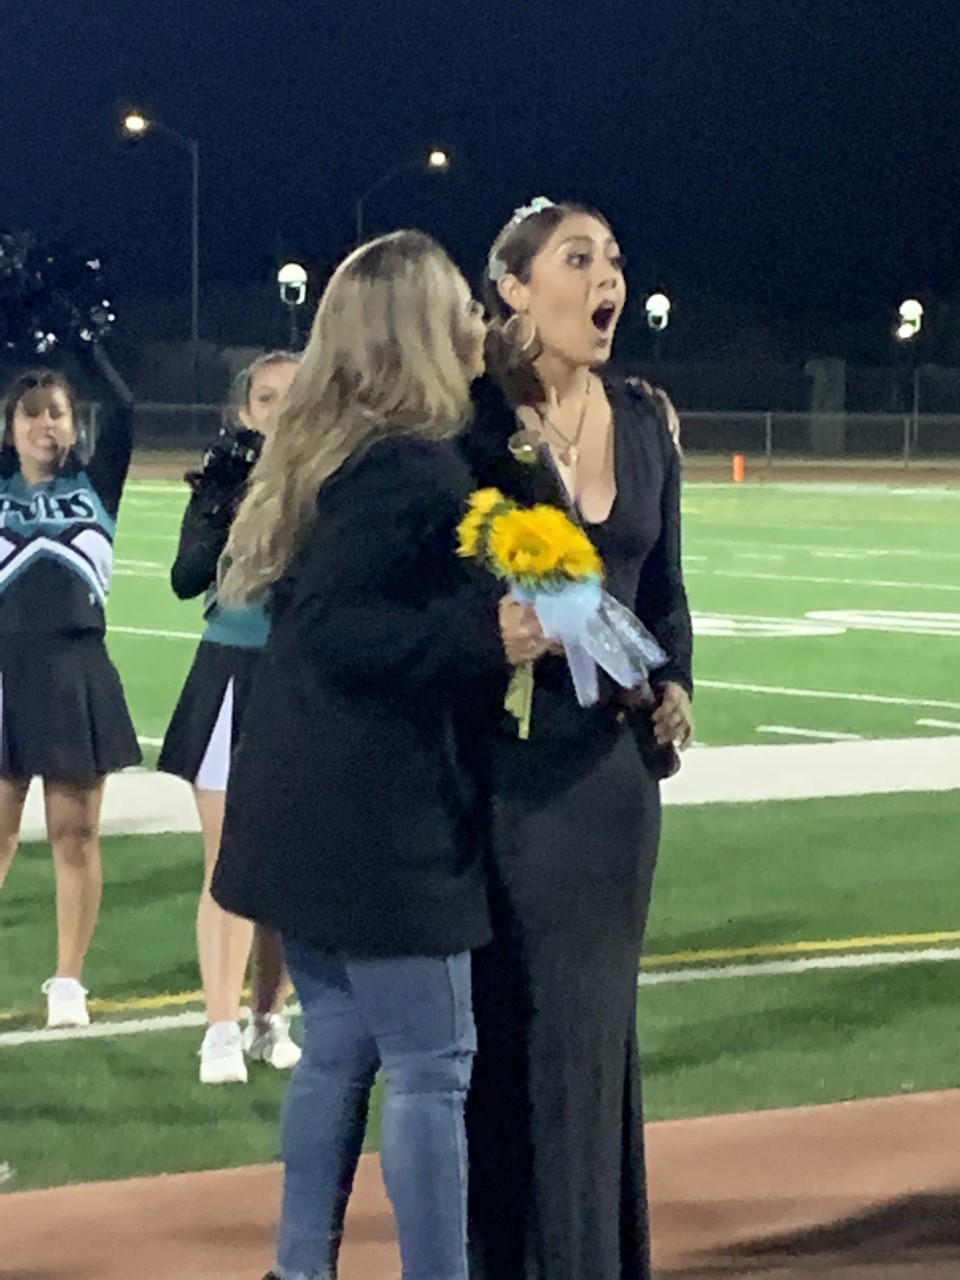 Our 2021 Homecoming Queen, Sol